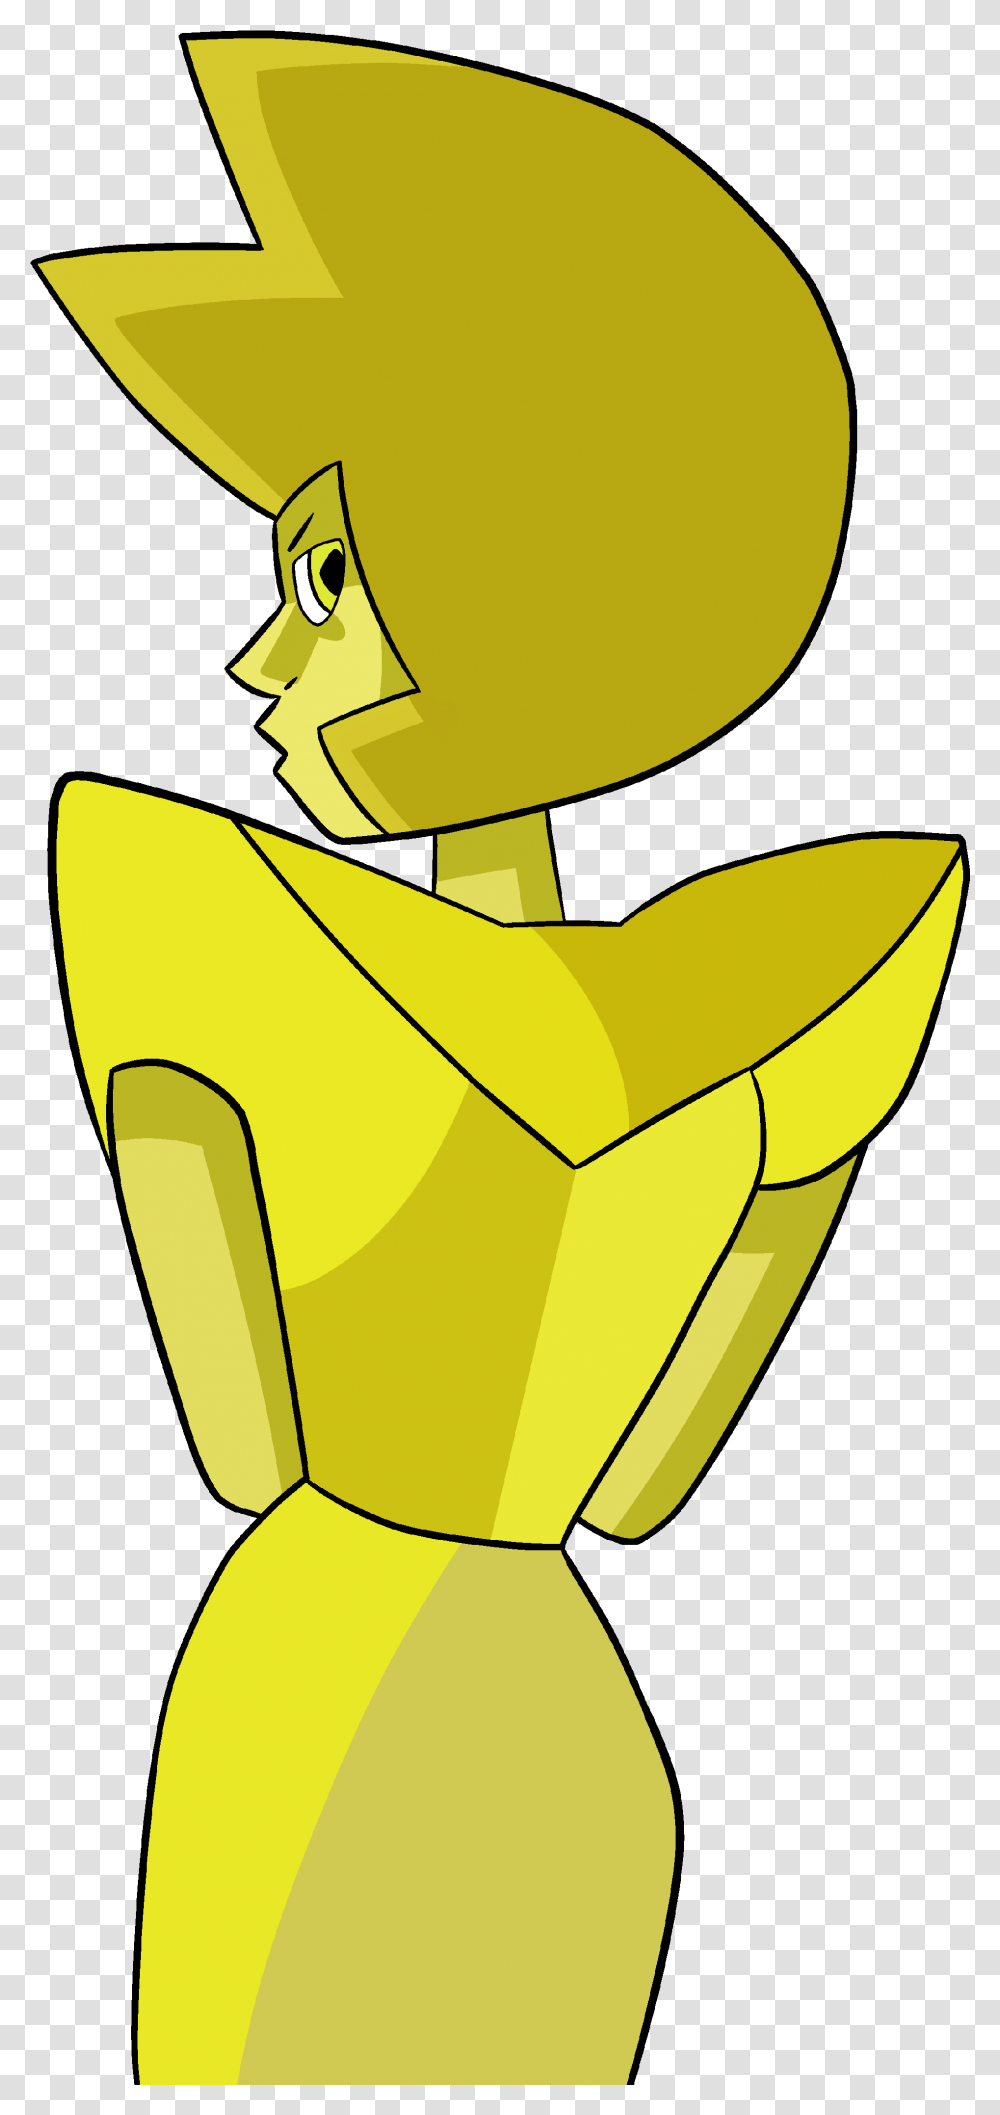 Image Yellow Diamond Extended Intro Shaded Steven Universe Extended Intro Yellow Diamond, Bag, Crystal Transparent Png